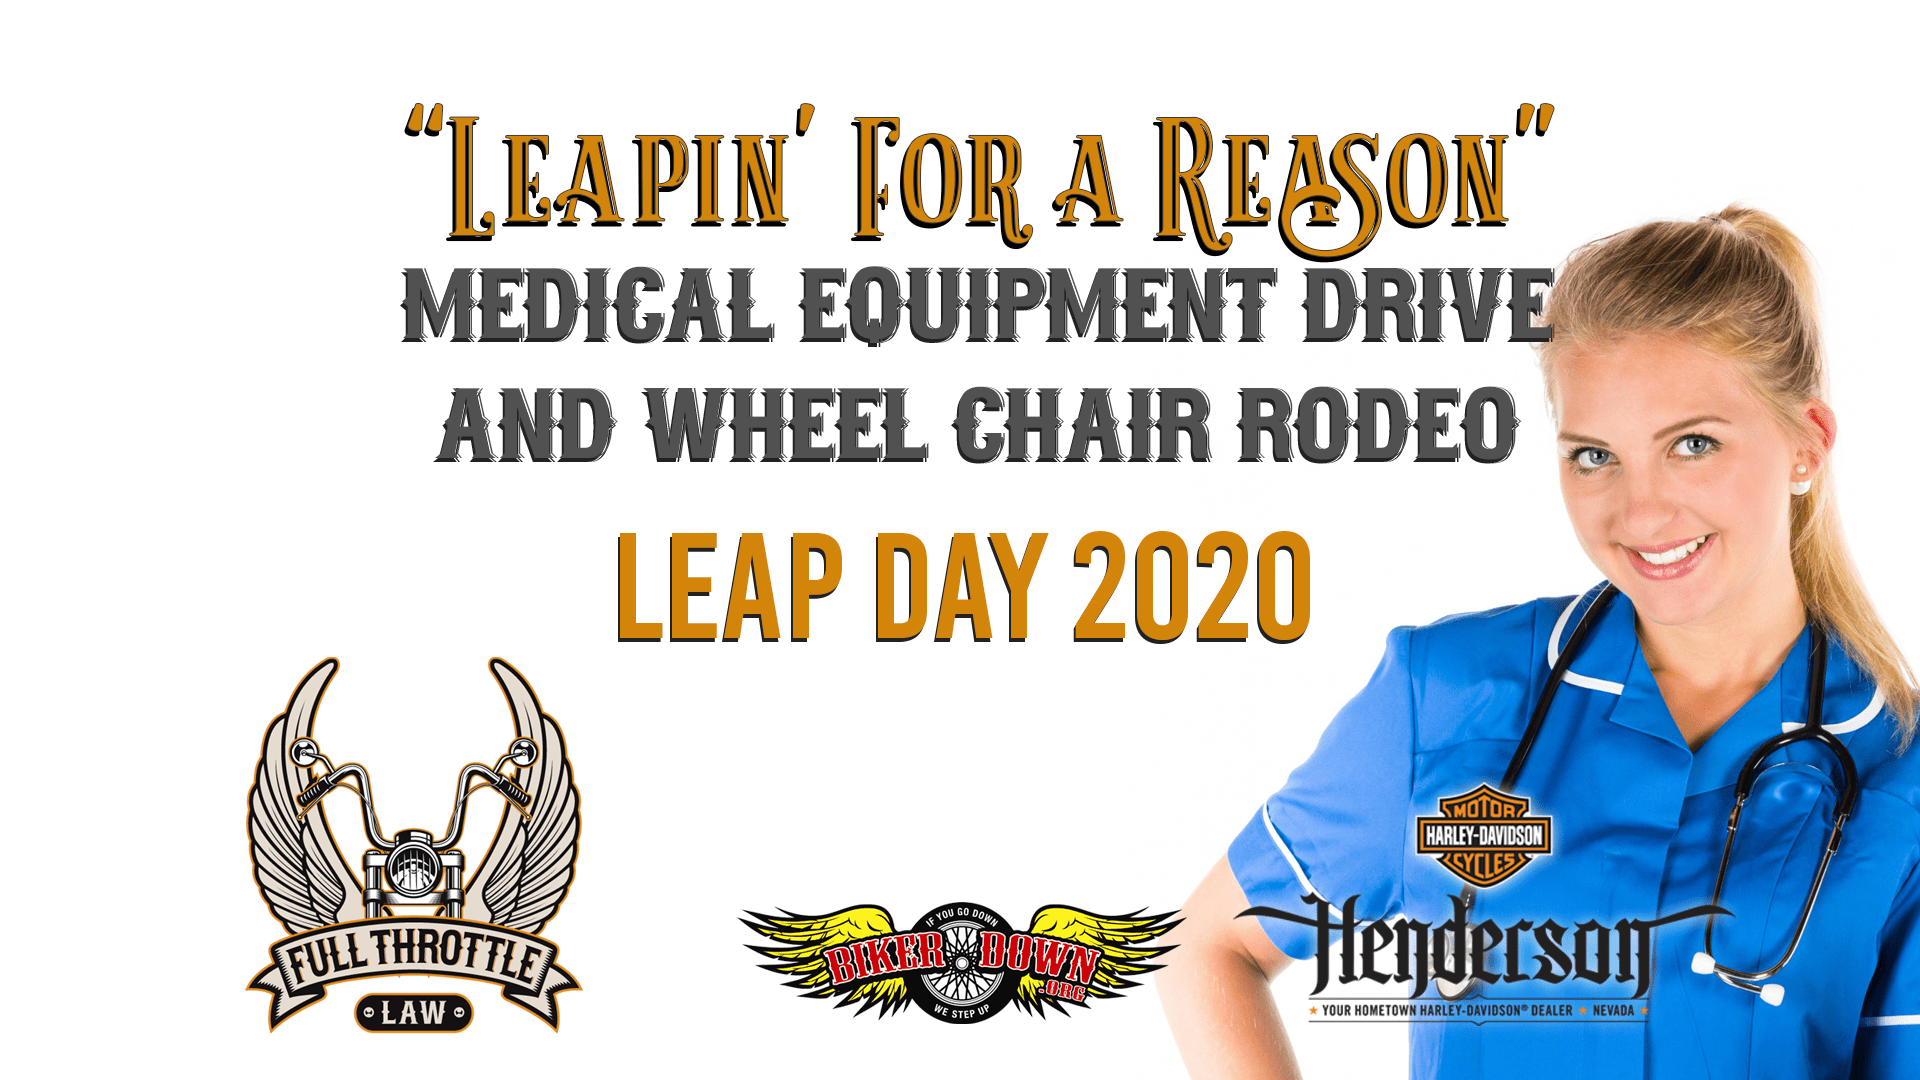 Las Vegas Bikers to Host a Wheelchair Derby Fundraiser for Injured Motorcycle Riders